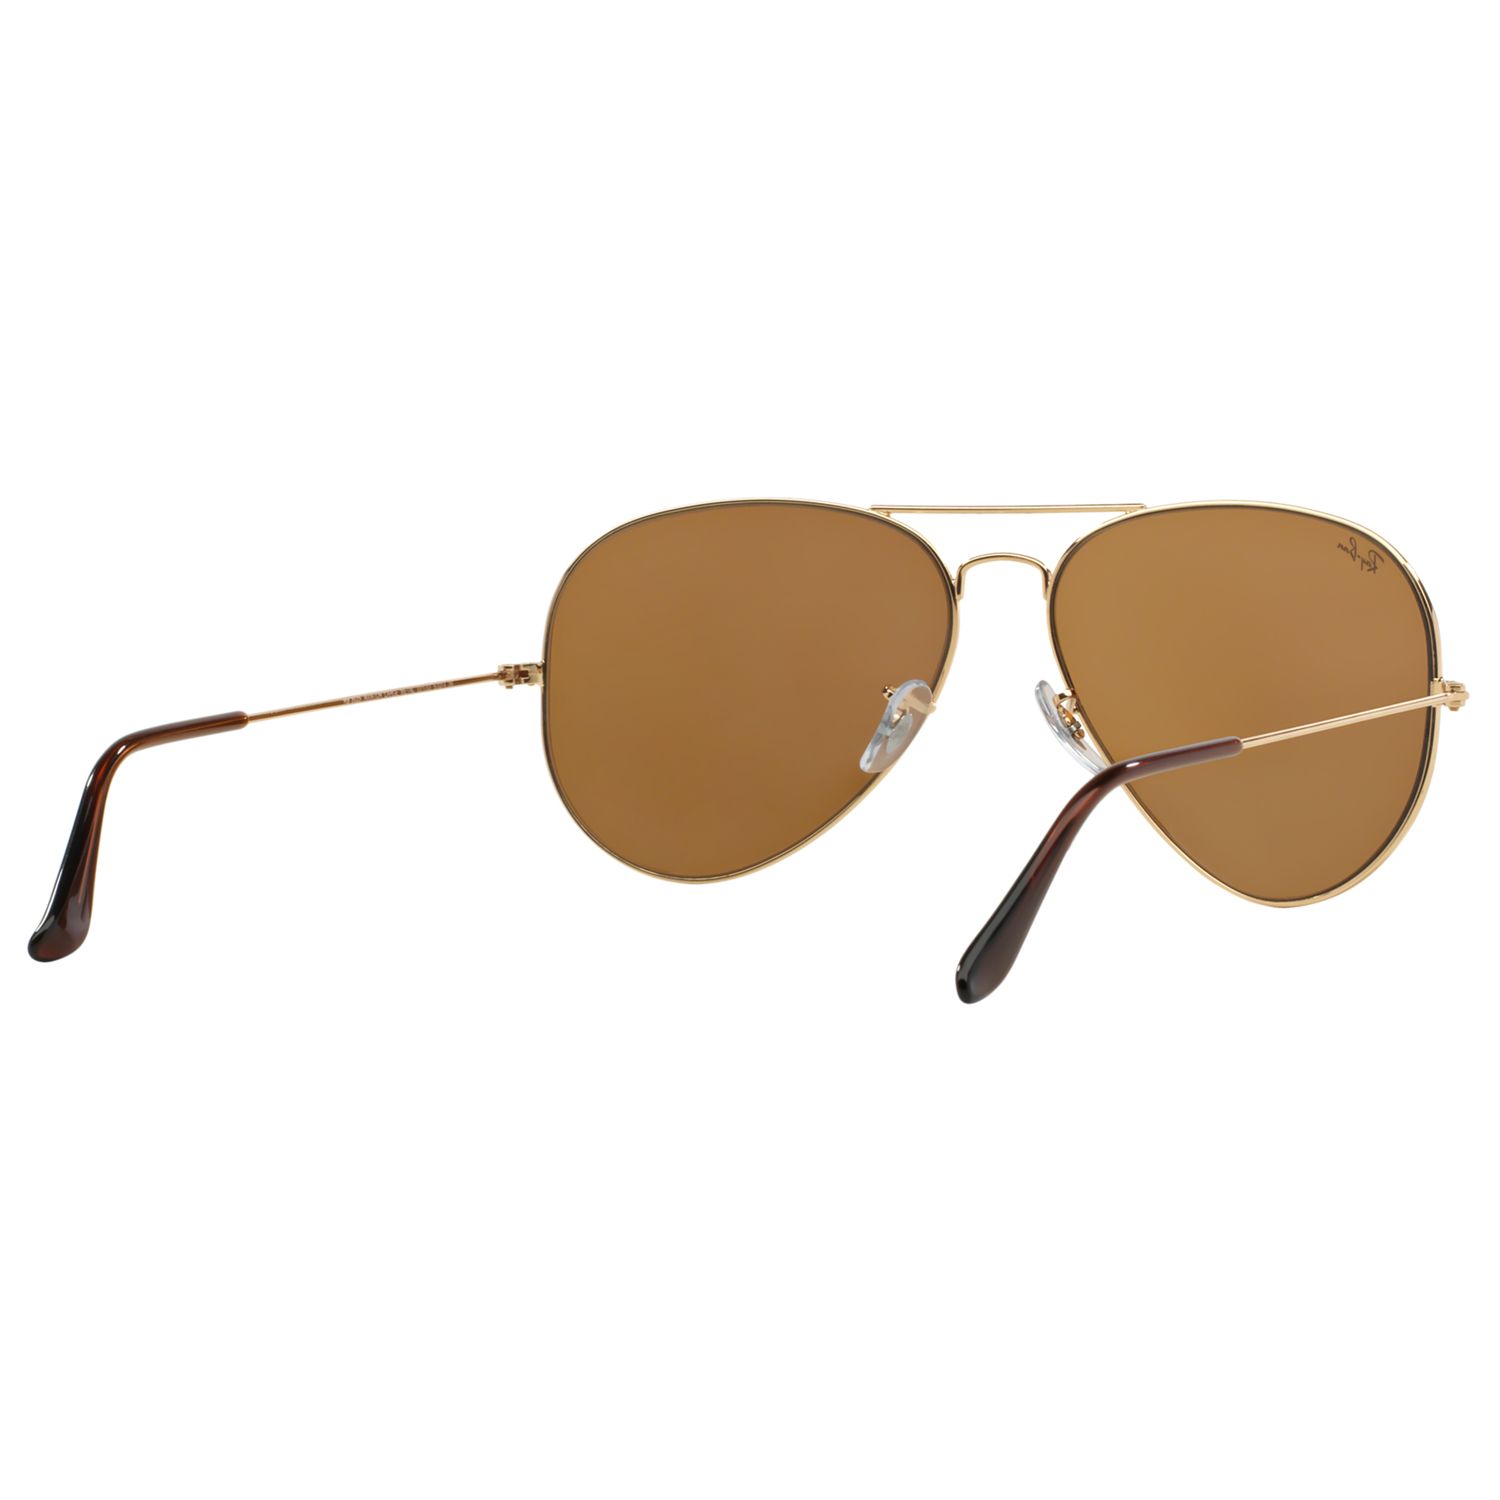 Ray-Ban RB3025 Iconic Aviator Sunglasses at John Lewis & Partners